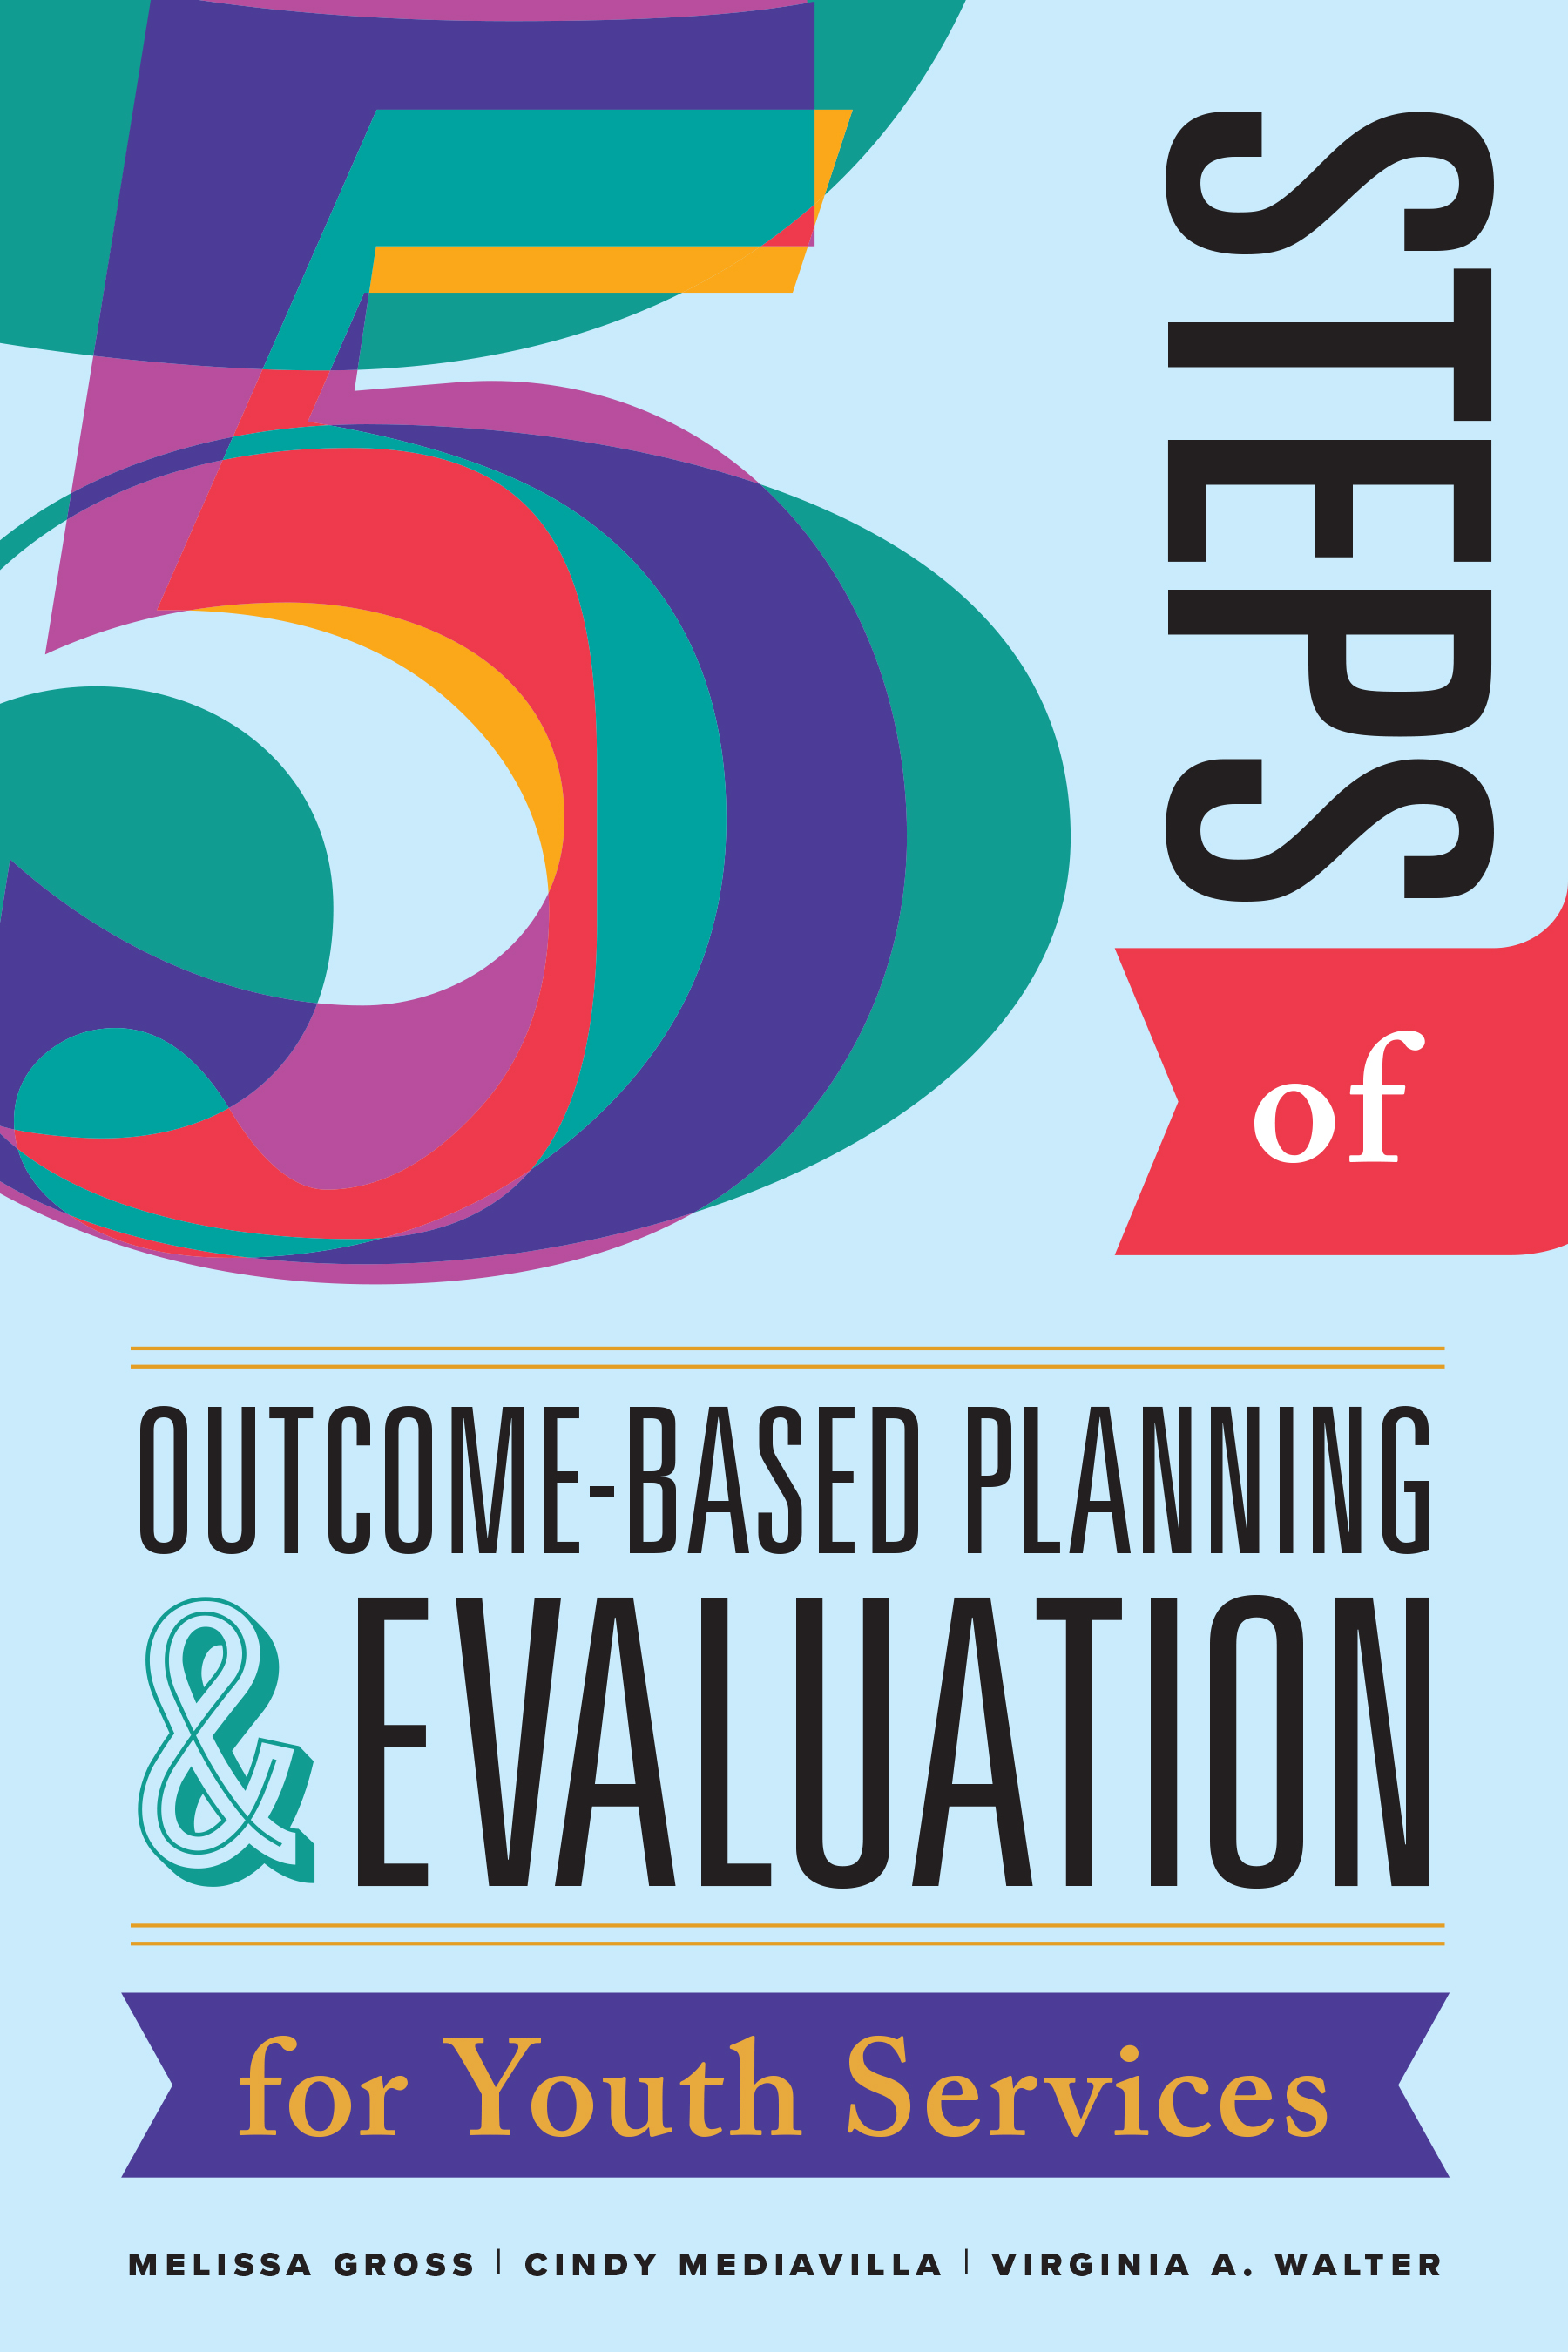 Image for Five Steps of Outcome-Based Planning & Evaluation for Youth Services